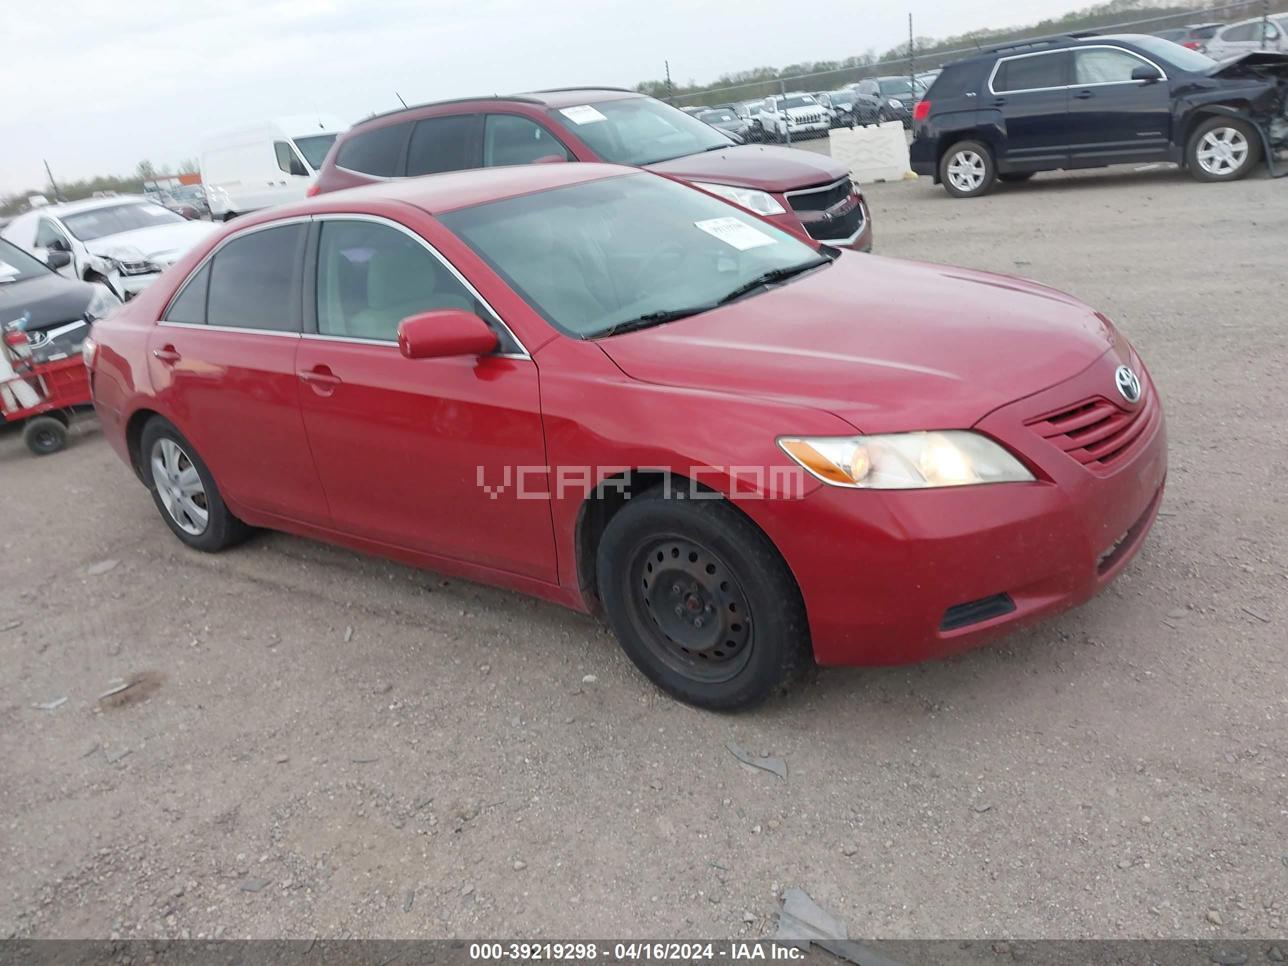 VIN: 4T4BE46K69R090580 - toyota camry